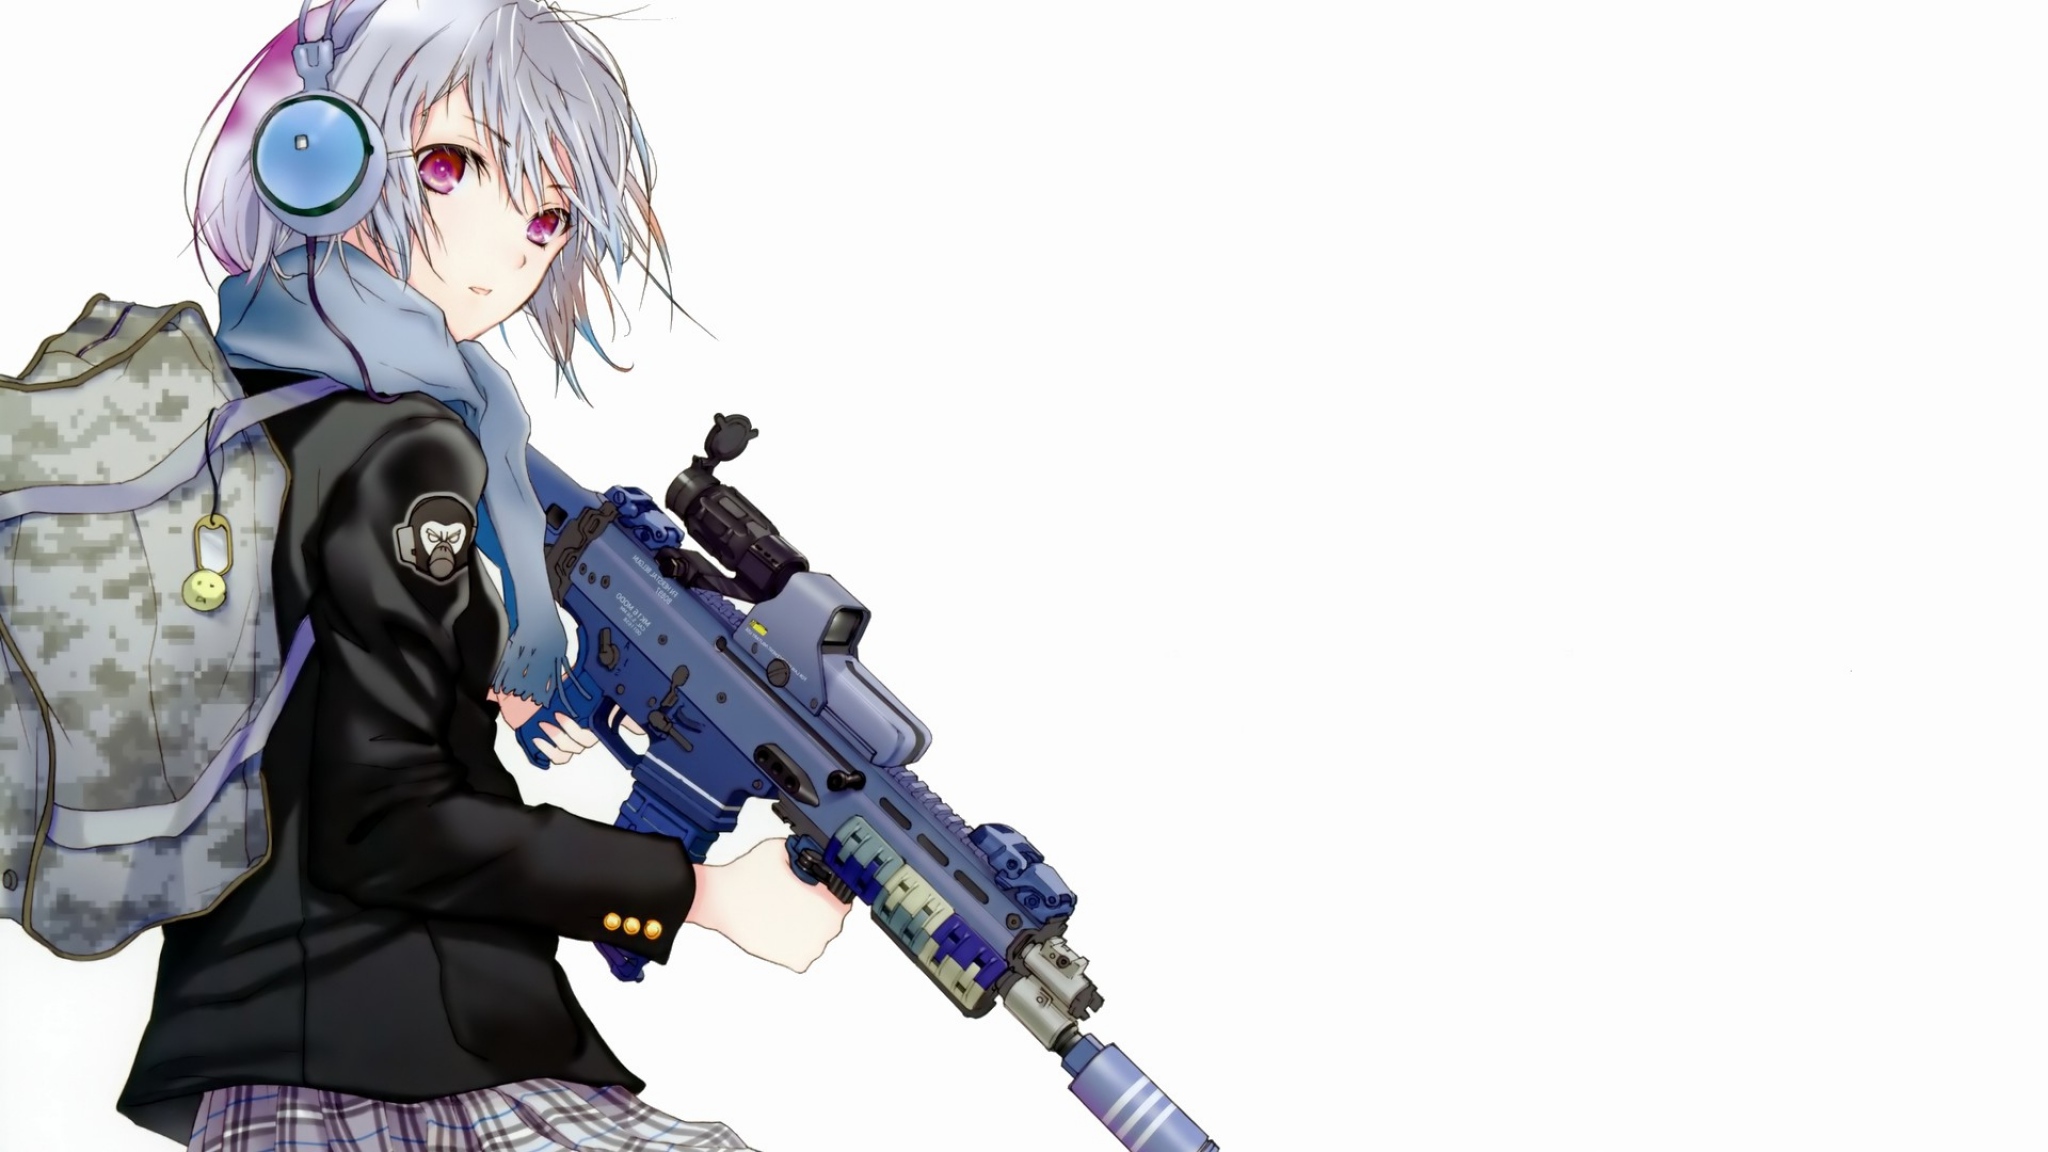 Download 2048x1152 Anime Girl Attitude Backpack Weapons Wallpaper